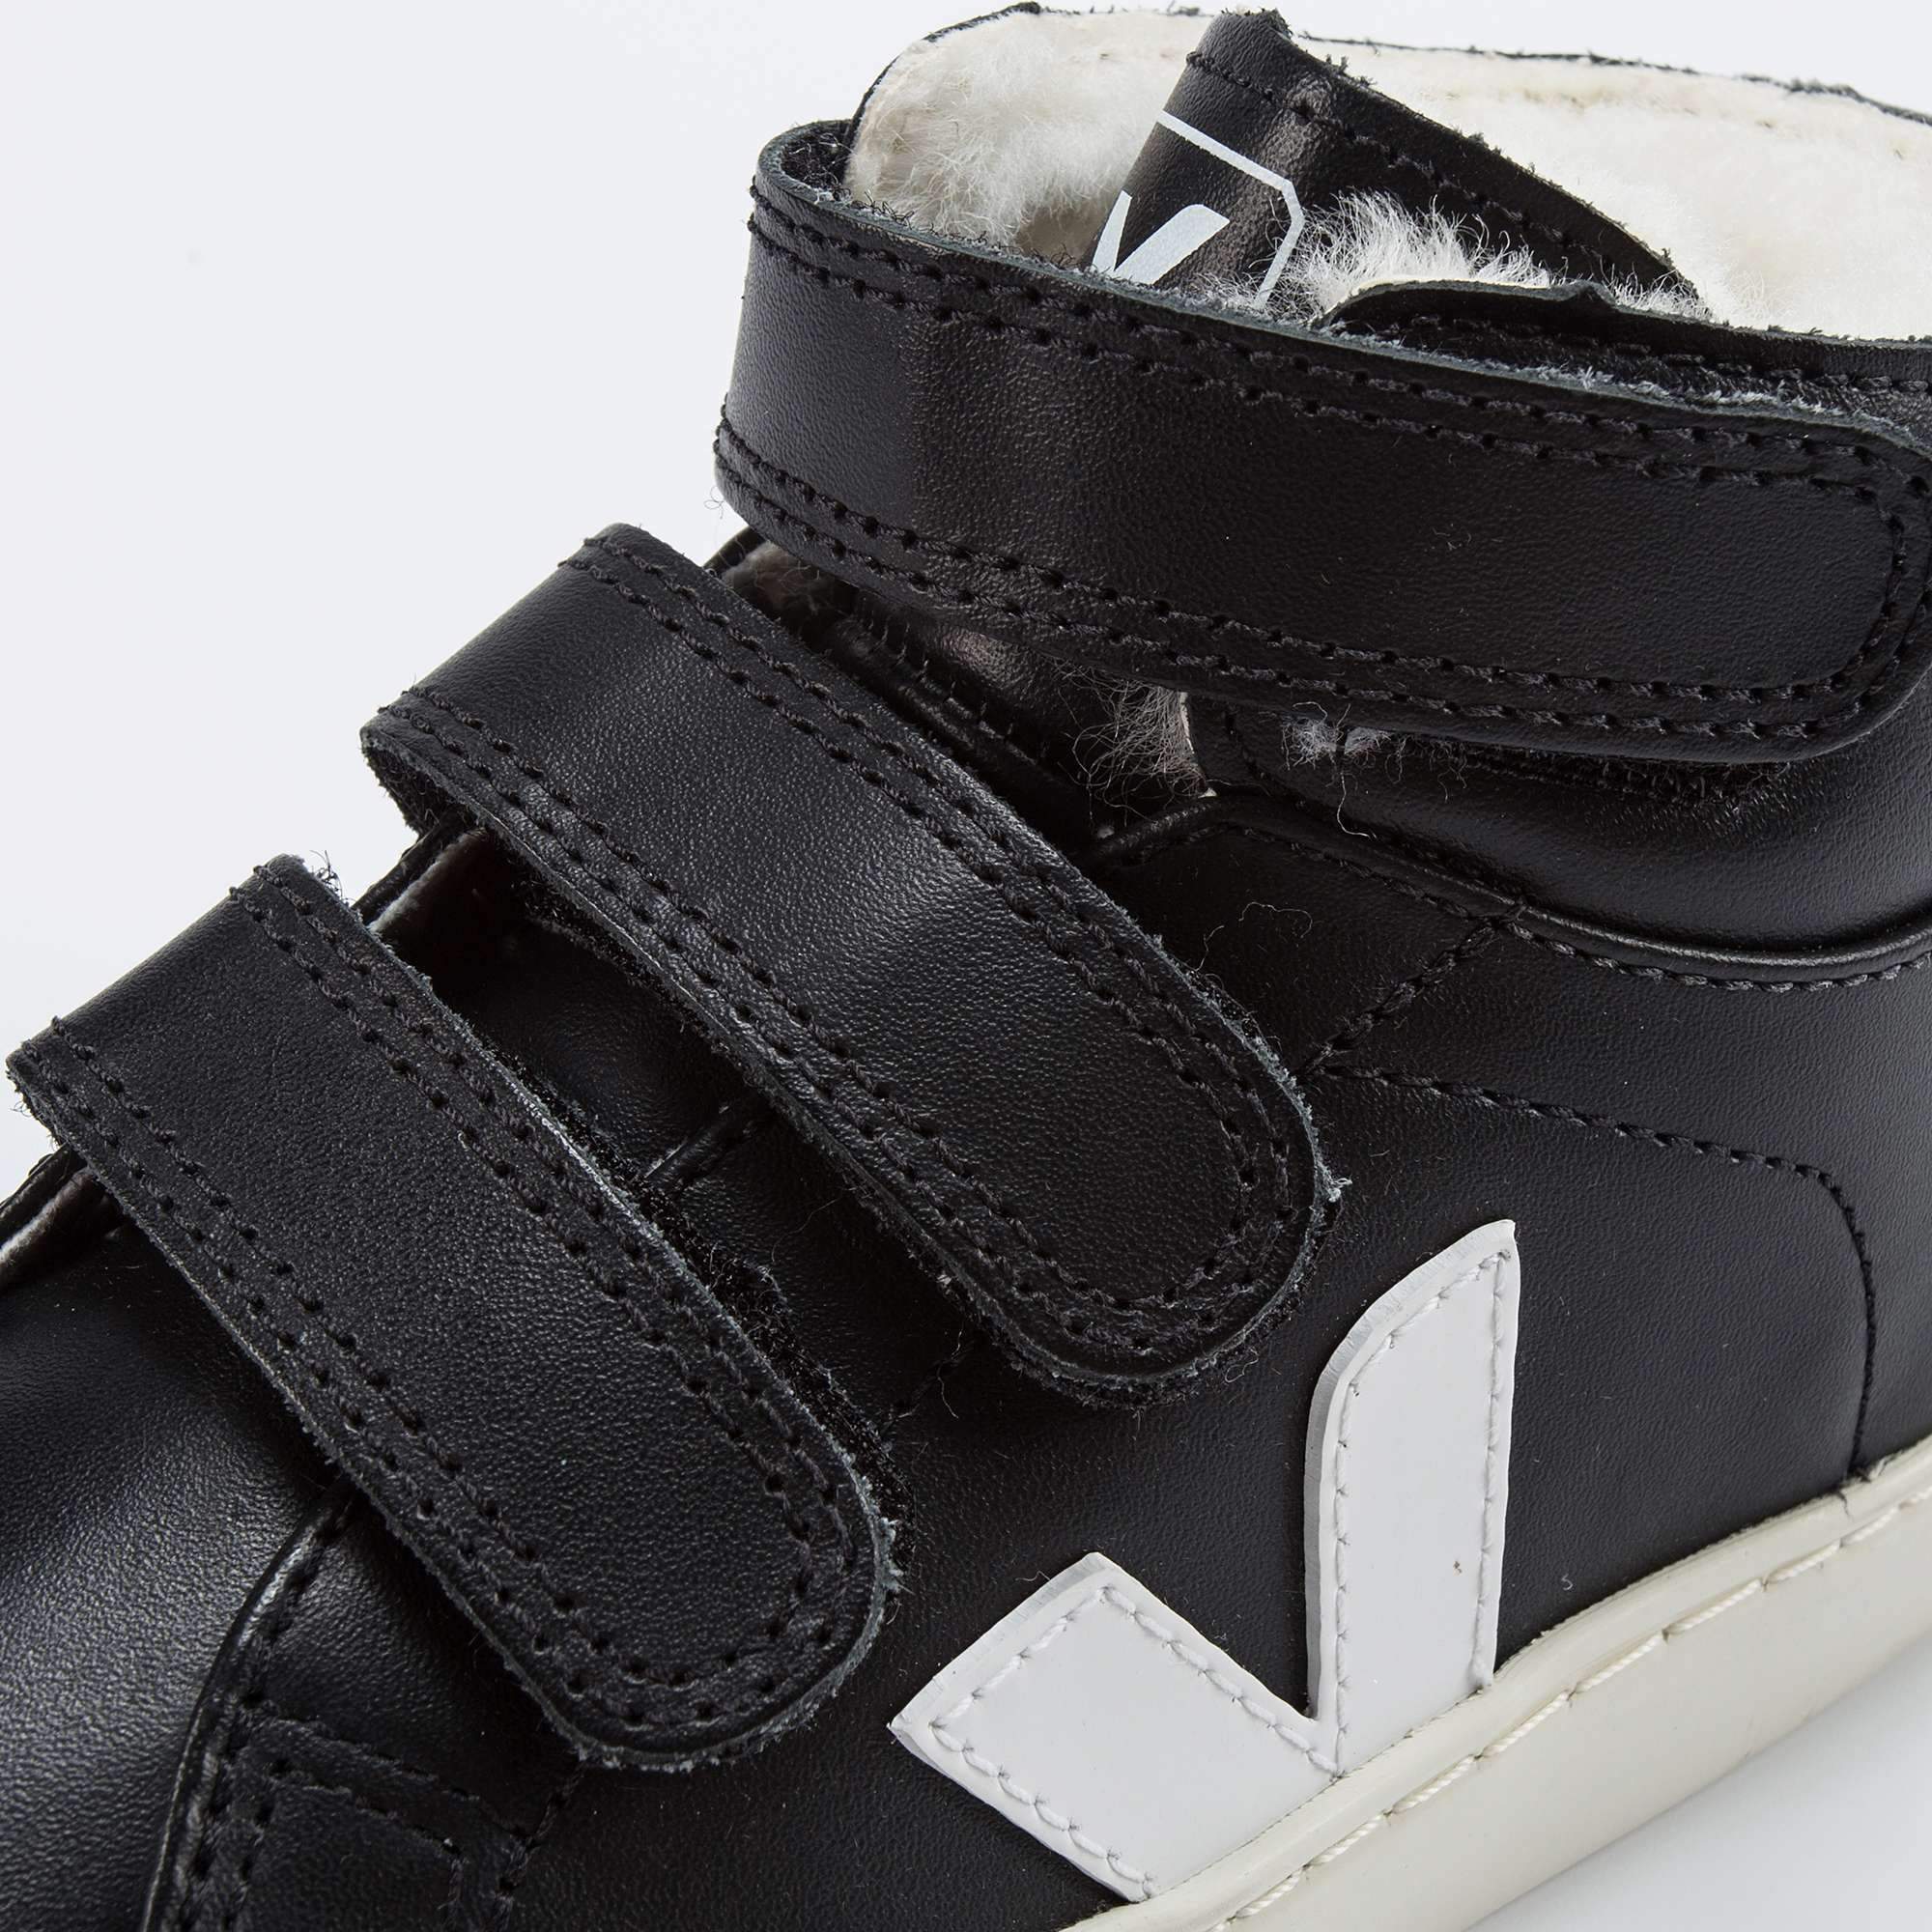 Boys Black Leather Velcro High Top Shoes